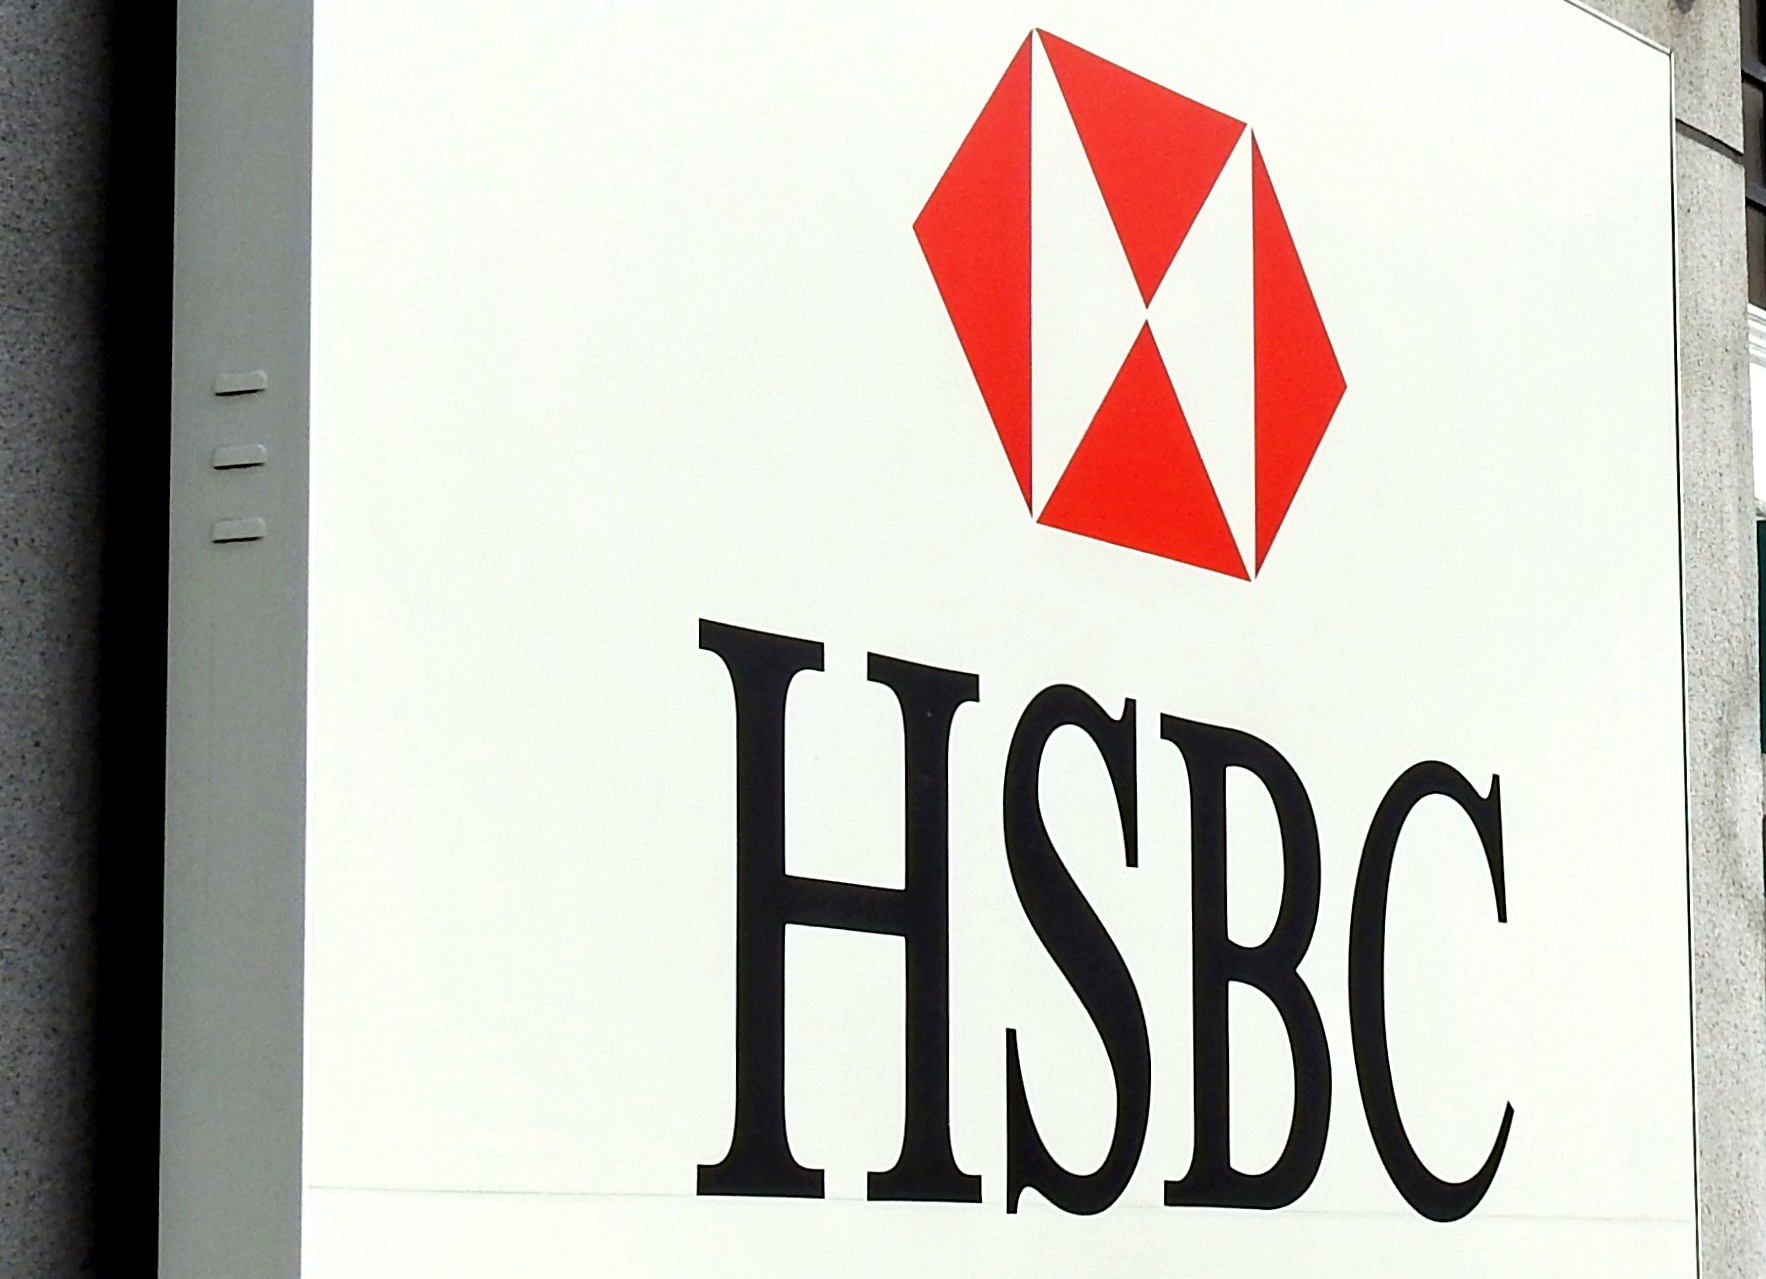 HSBC sign on front of building